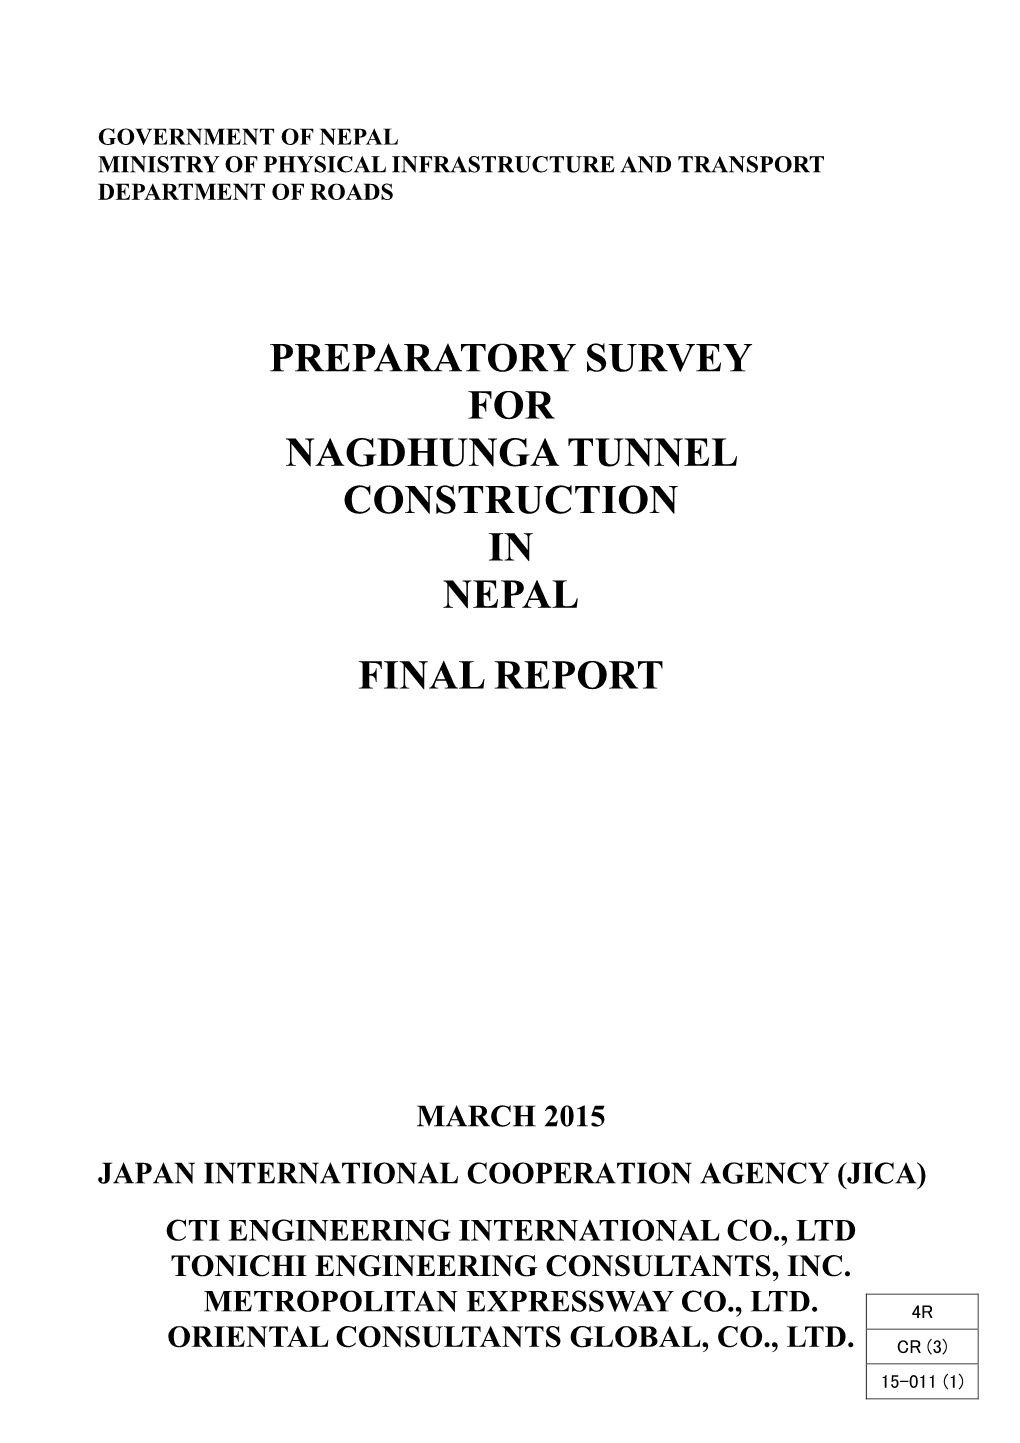 Preparatory Survey for Nagdhunga Tunnel Construction in Nepal Final Report